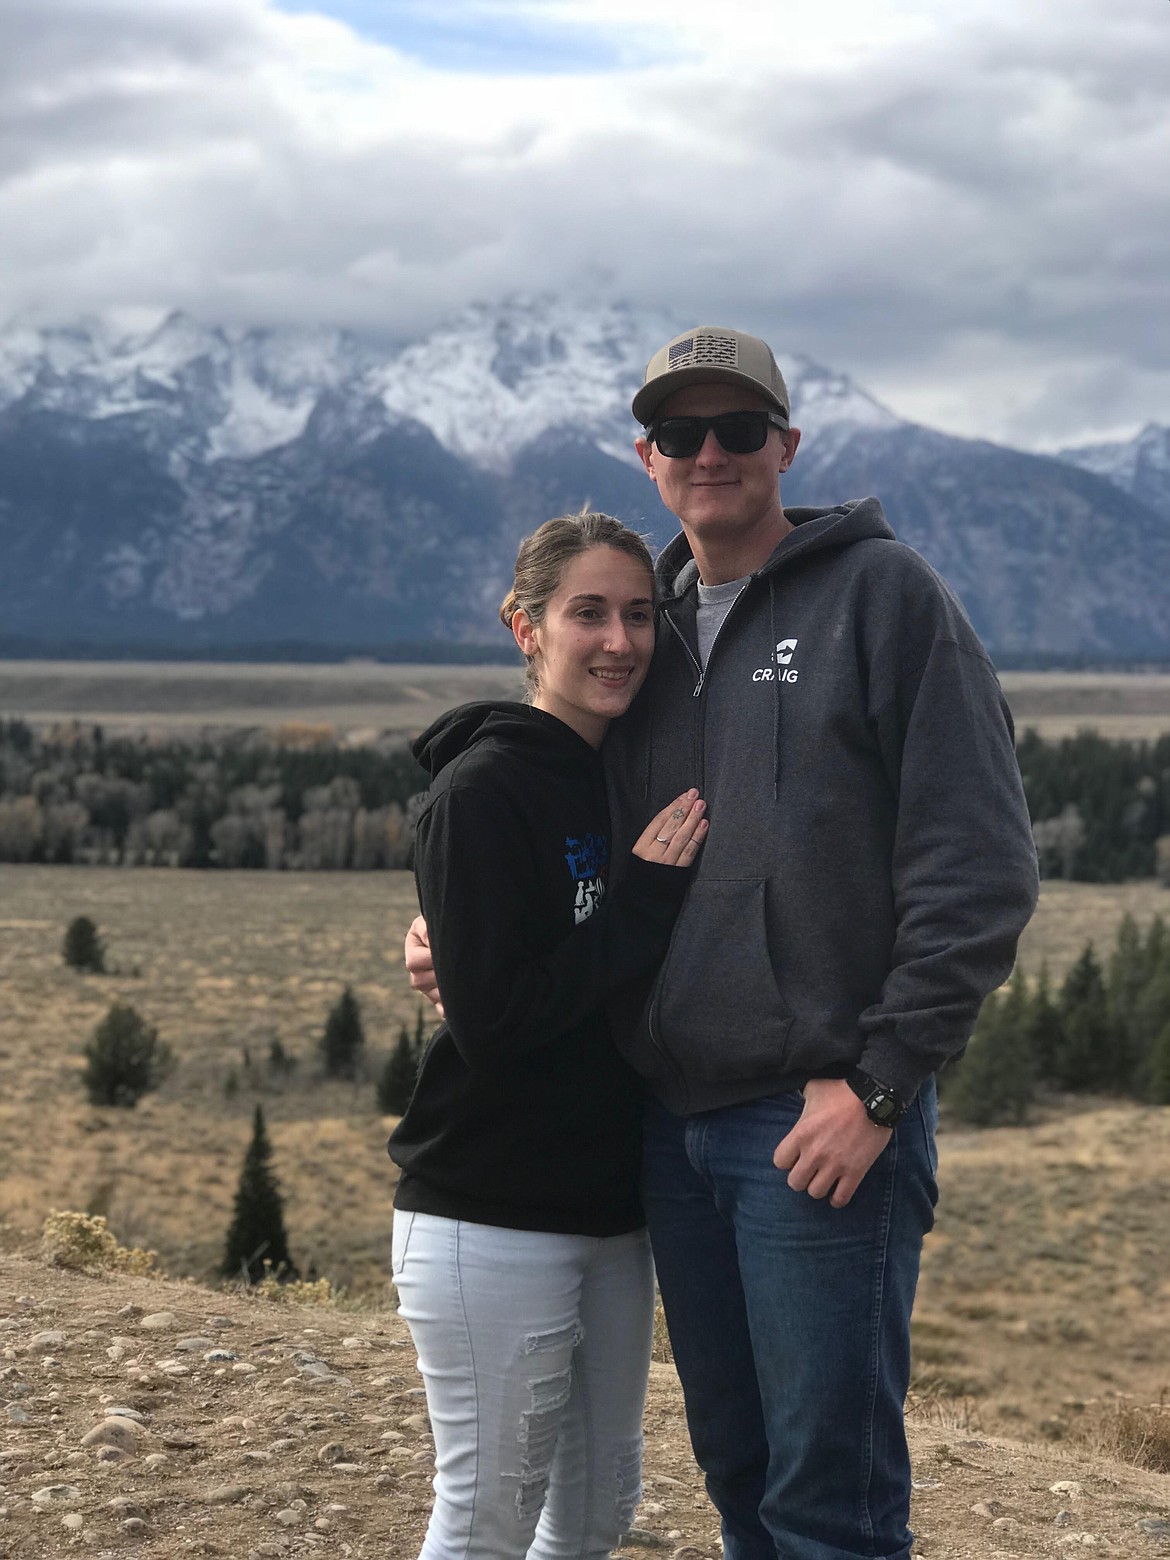 Kevin Riley of Plains, right, with his partner Emily Winter. Riley was rushed to Kalispell Regional Medical Center last summer after a logging accident that required A.L.E.R.T. and other local Flathead County emergency services. (Photo provided by Kevin Riley)